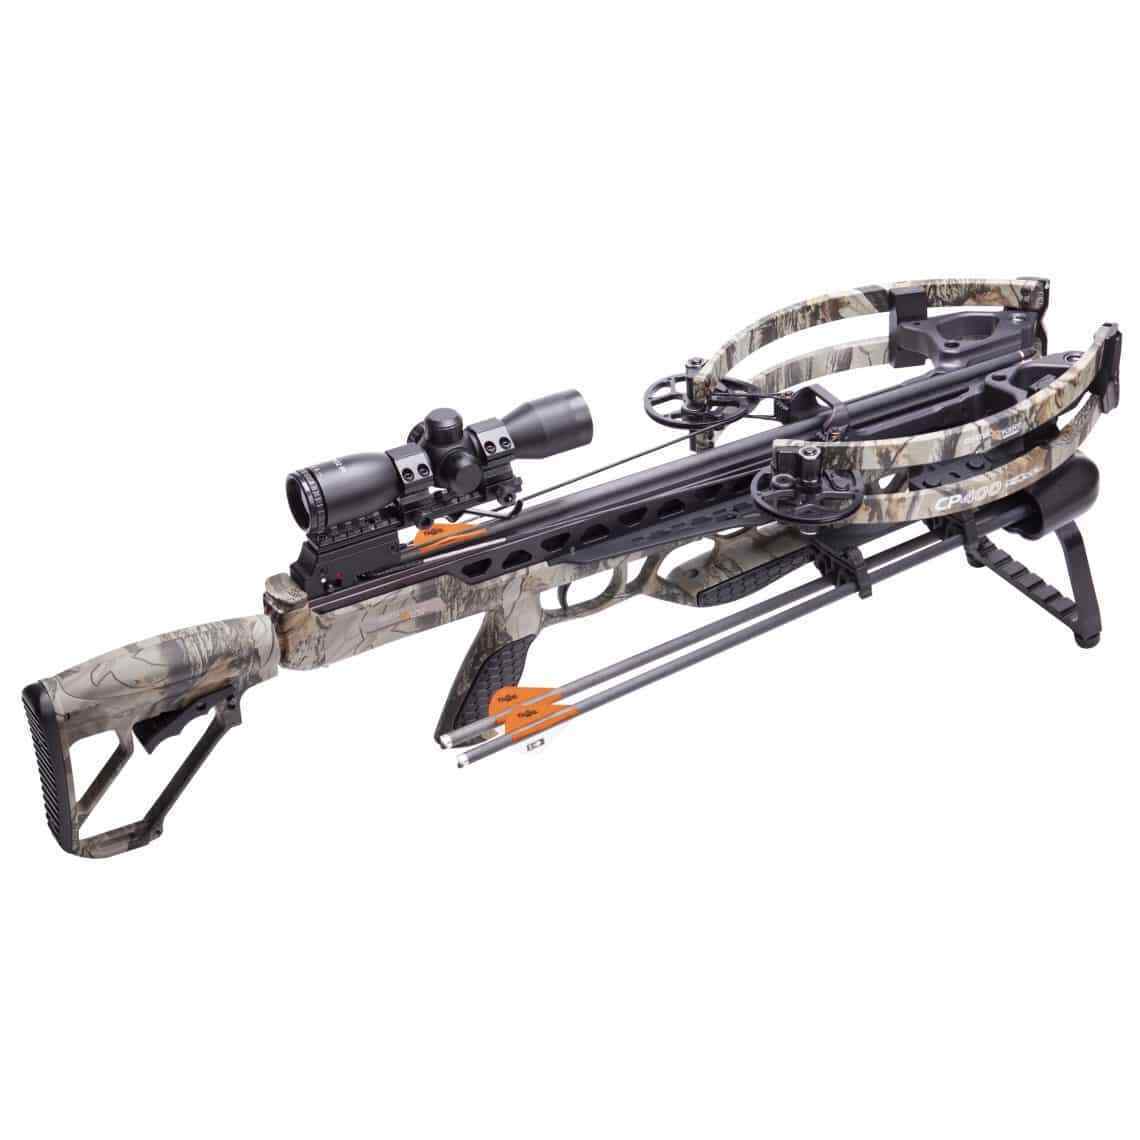 New 2021 Centerpoint Cp400 Crossbow Package Ravin R Limbs Camo 400fps!